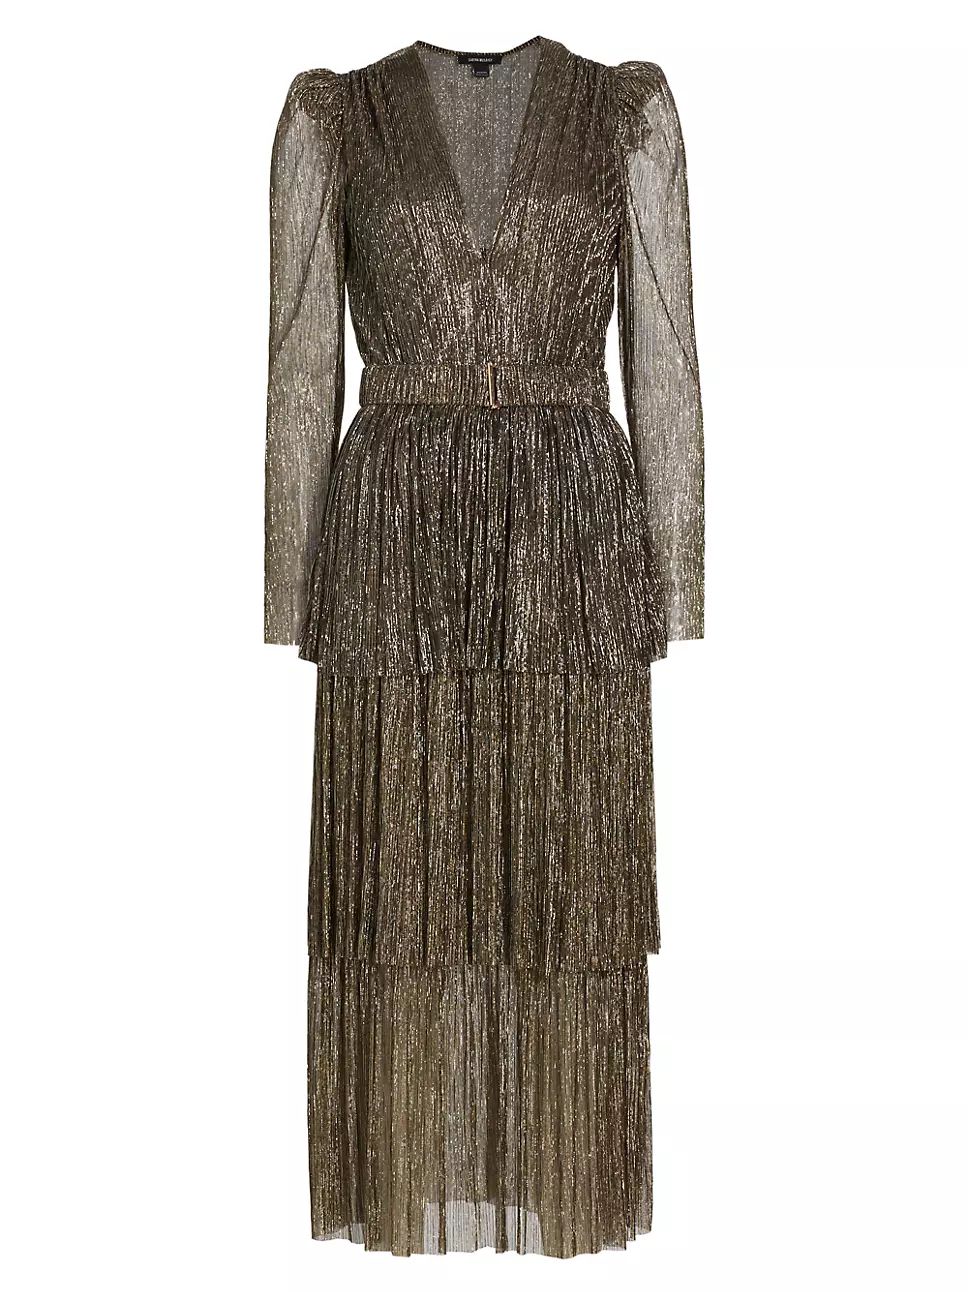 Carry Tiered Belted Metallic Dress | Saks Fifth Avenue